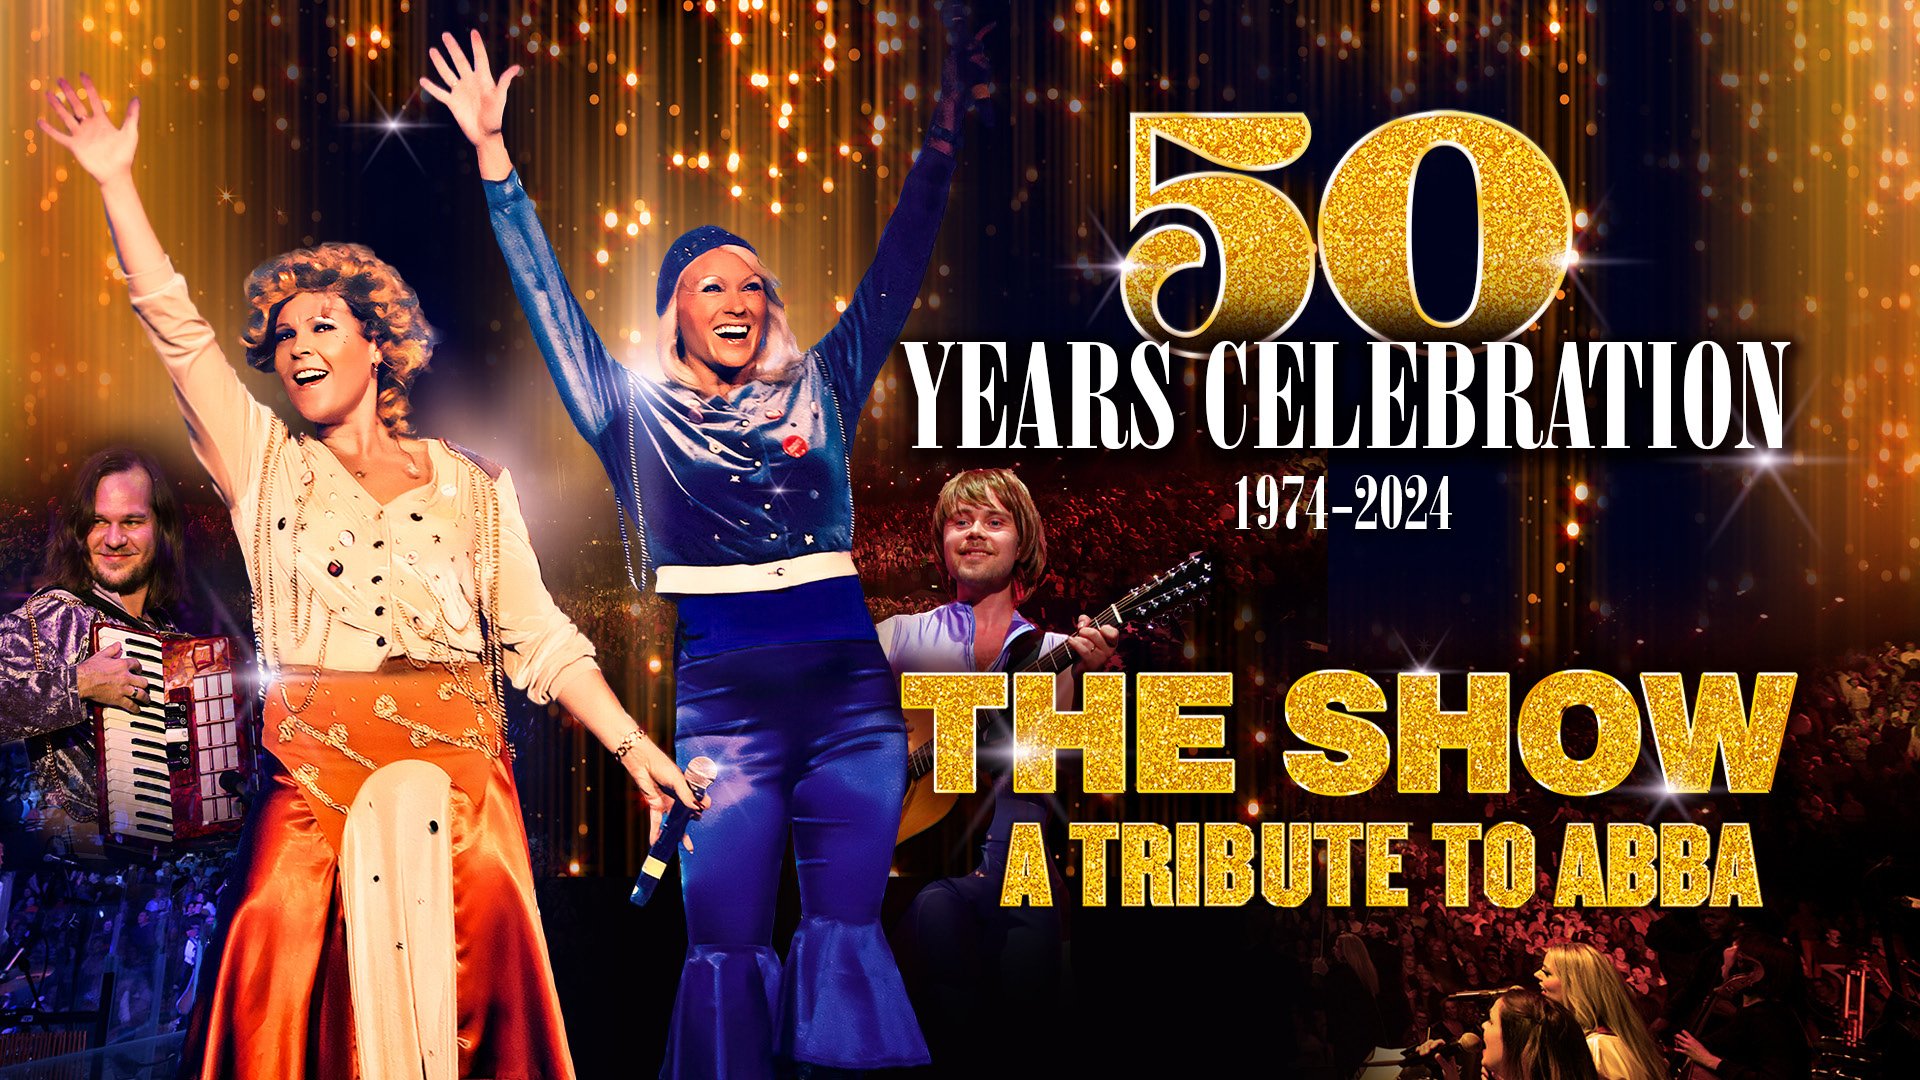 THE SHOW – A Tribute To ABBA